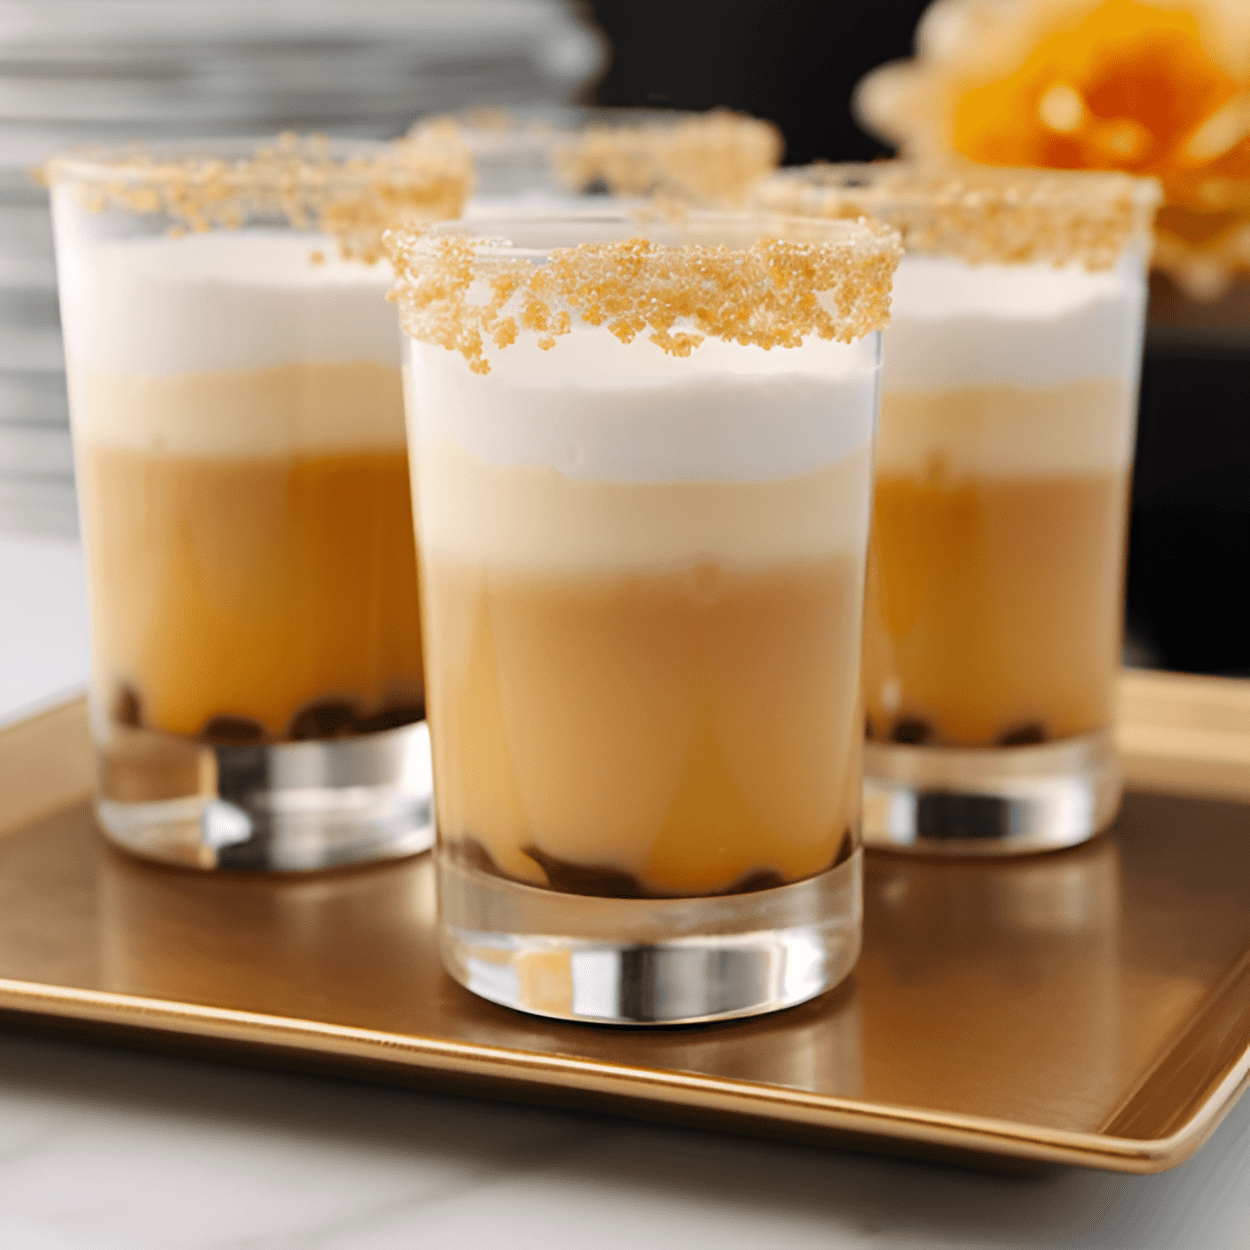 Payday Shot Recipe - The Payday Shot has a sweet and nutty taste, with a hint of caramel and a smooth, creamy finish. It is a well-balanced drink that is not too strong, making it perfect for sipping and savoring.